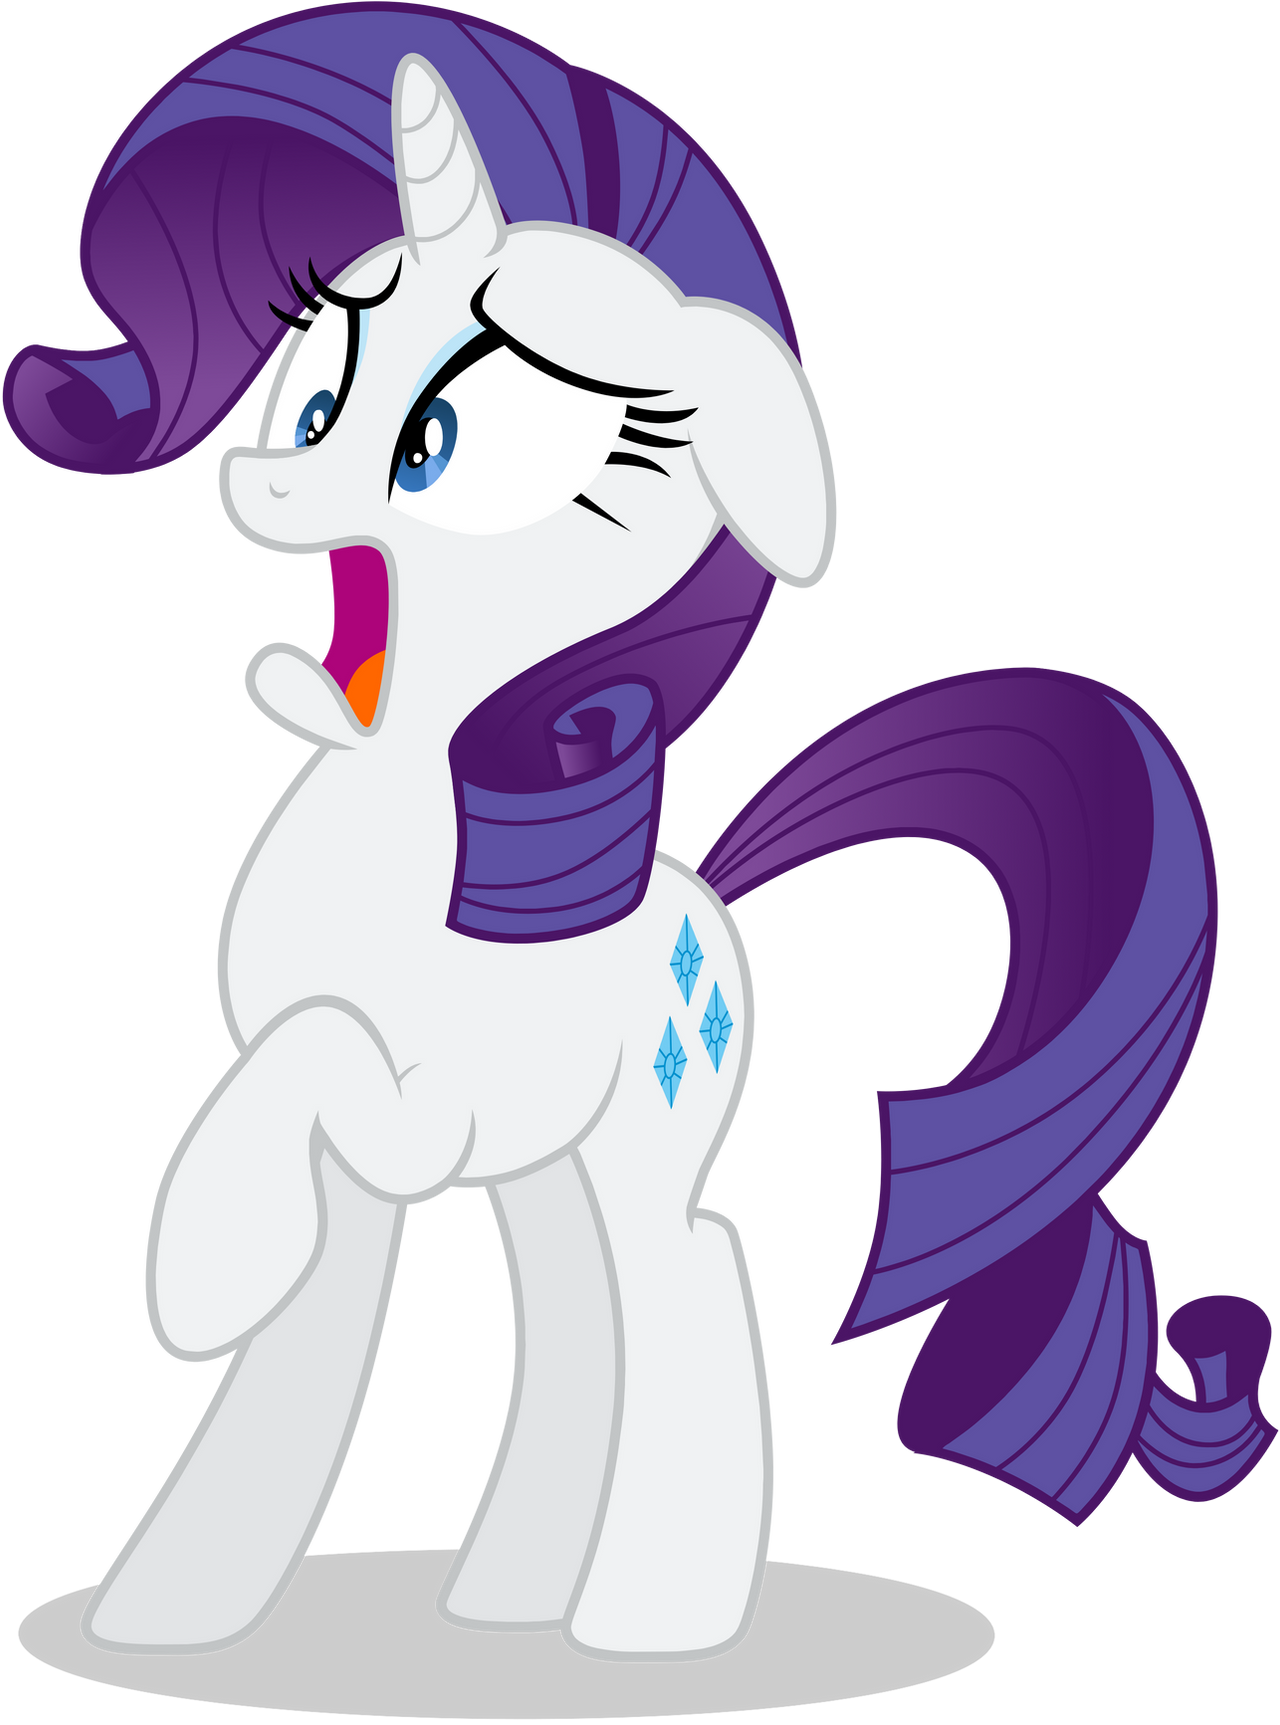 rarity___in_shock___horrified_by_tomfrag